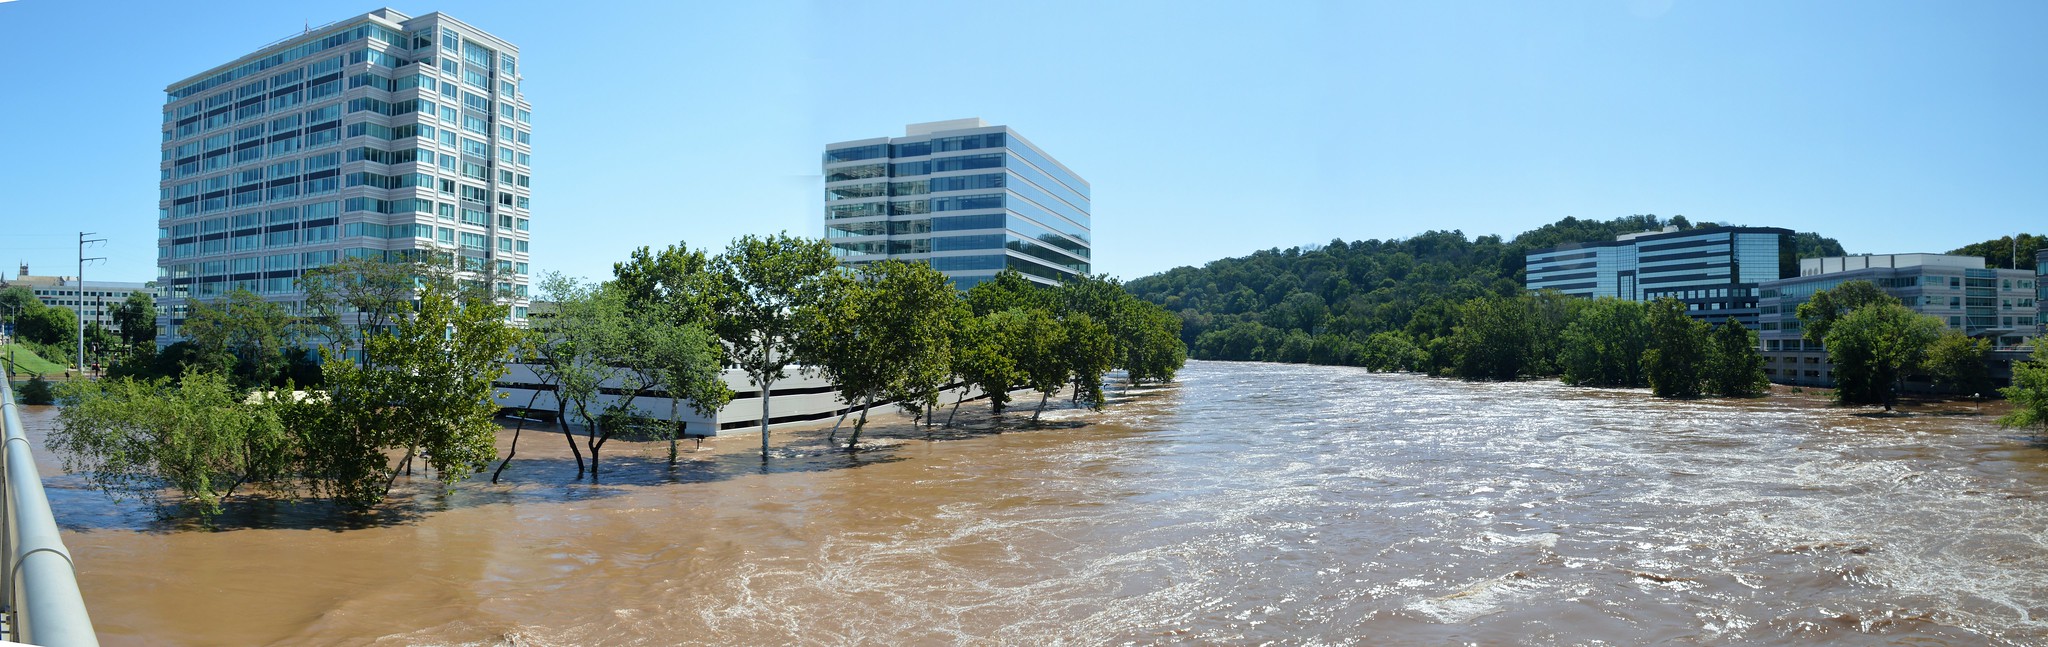 Photo of flooded area around office buildings.